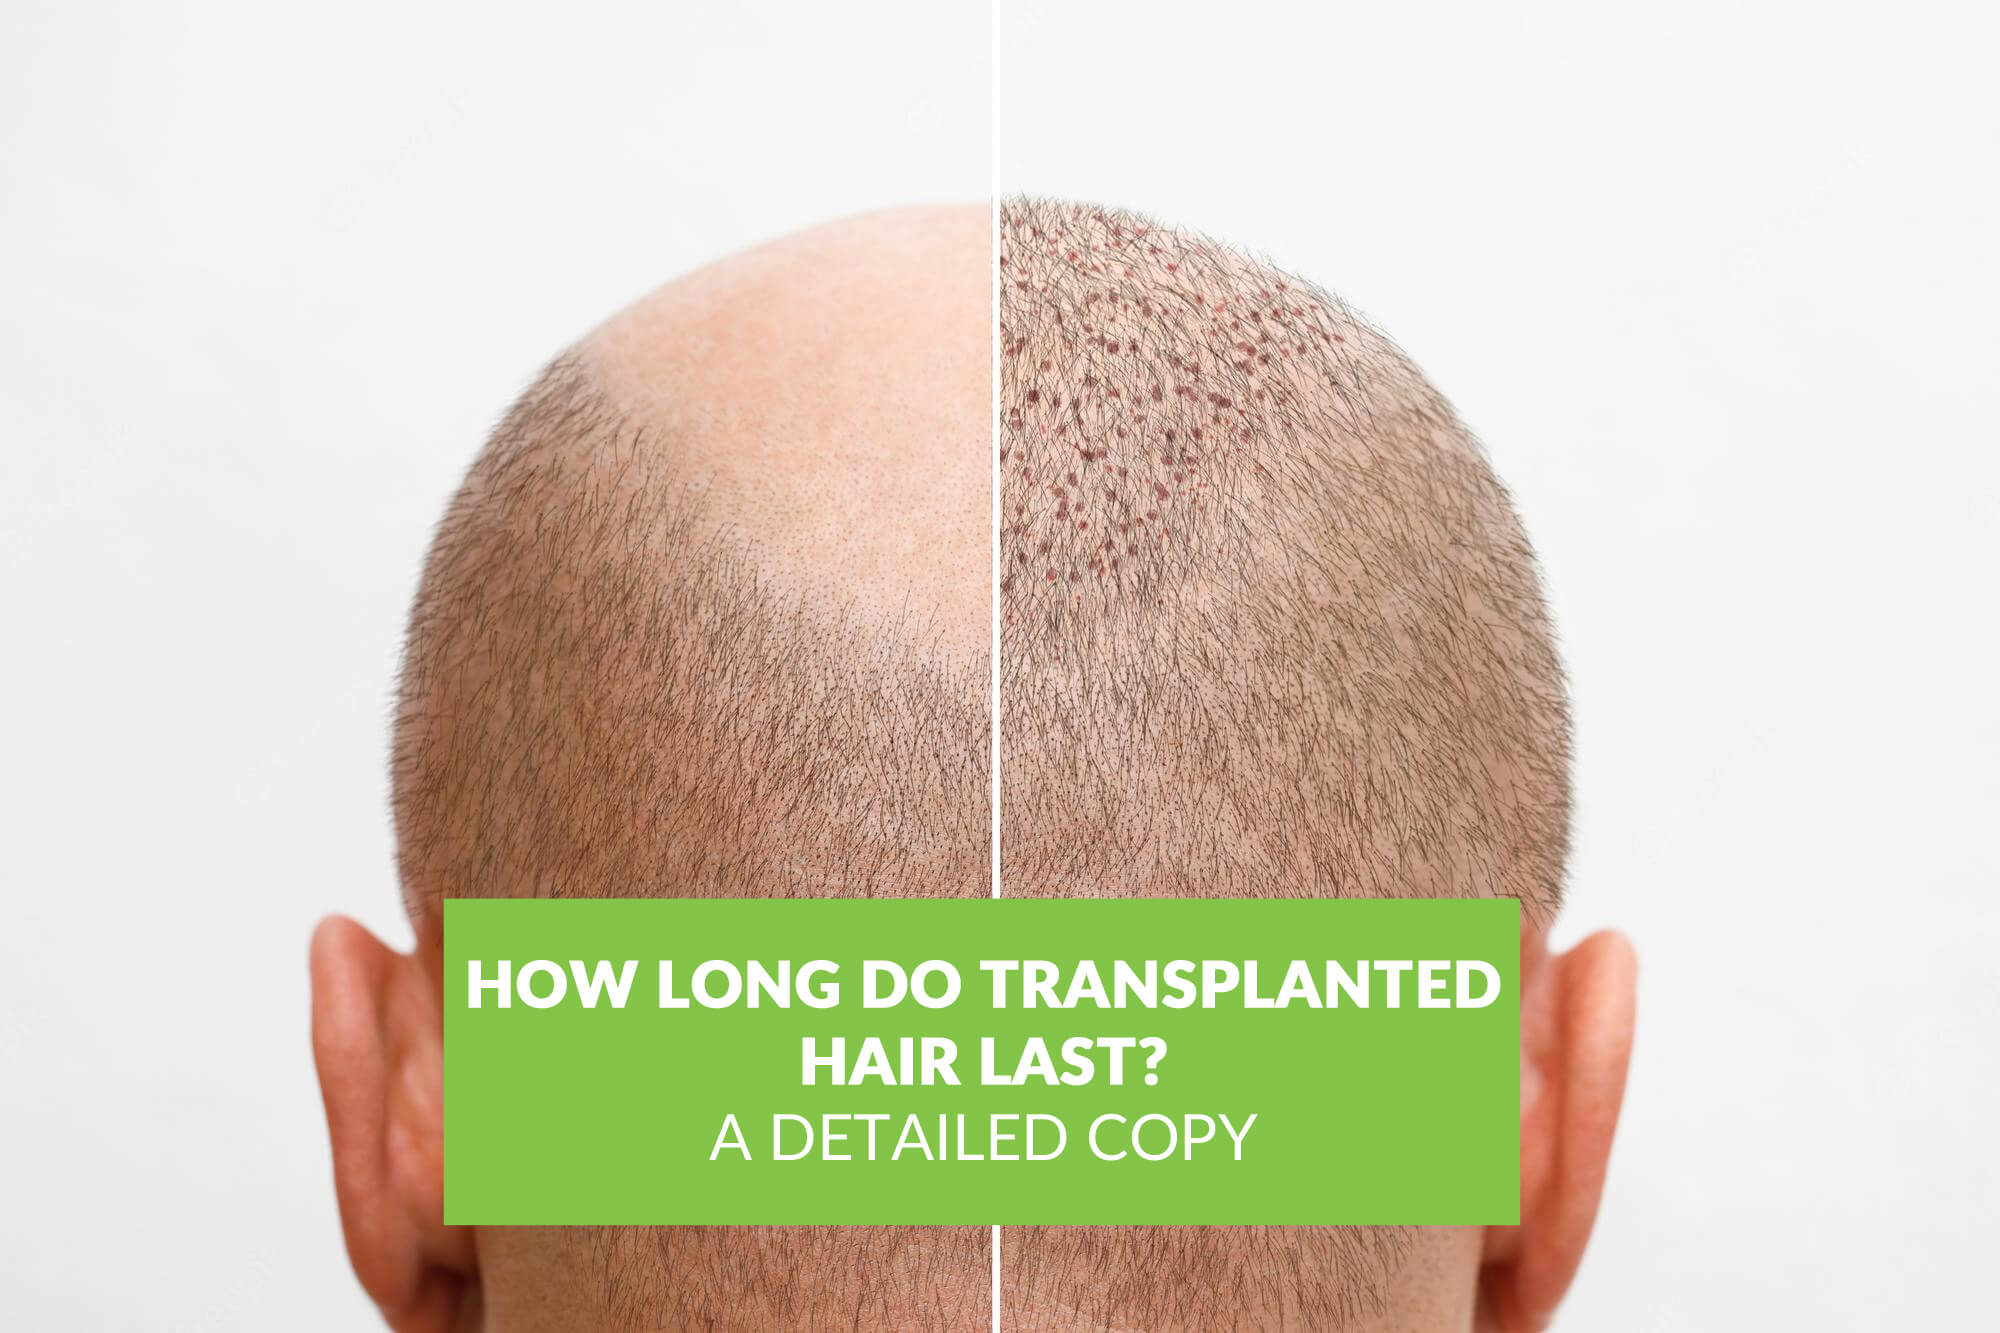 How Long Do Transplanted Hair Last: Is it Permanent?